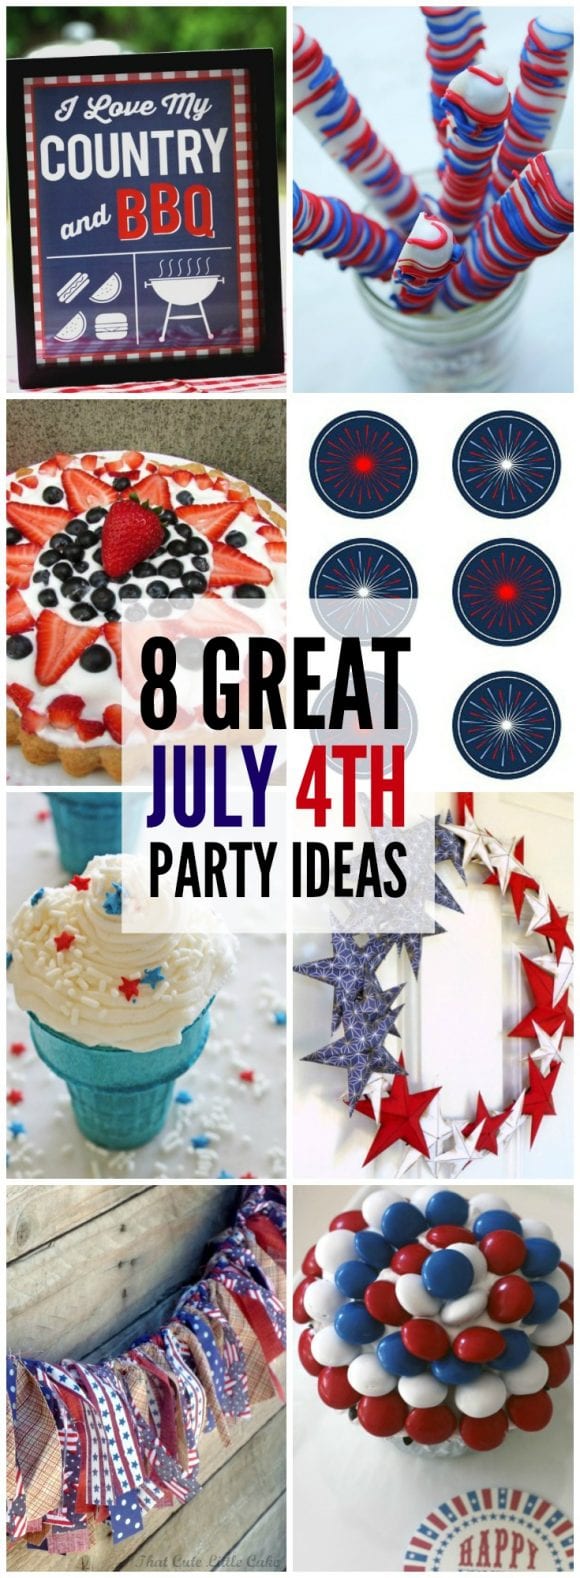 july4th-party-ideas-7 (1)